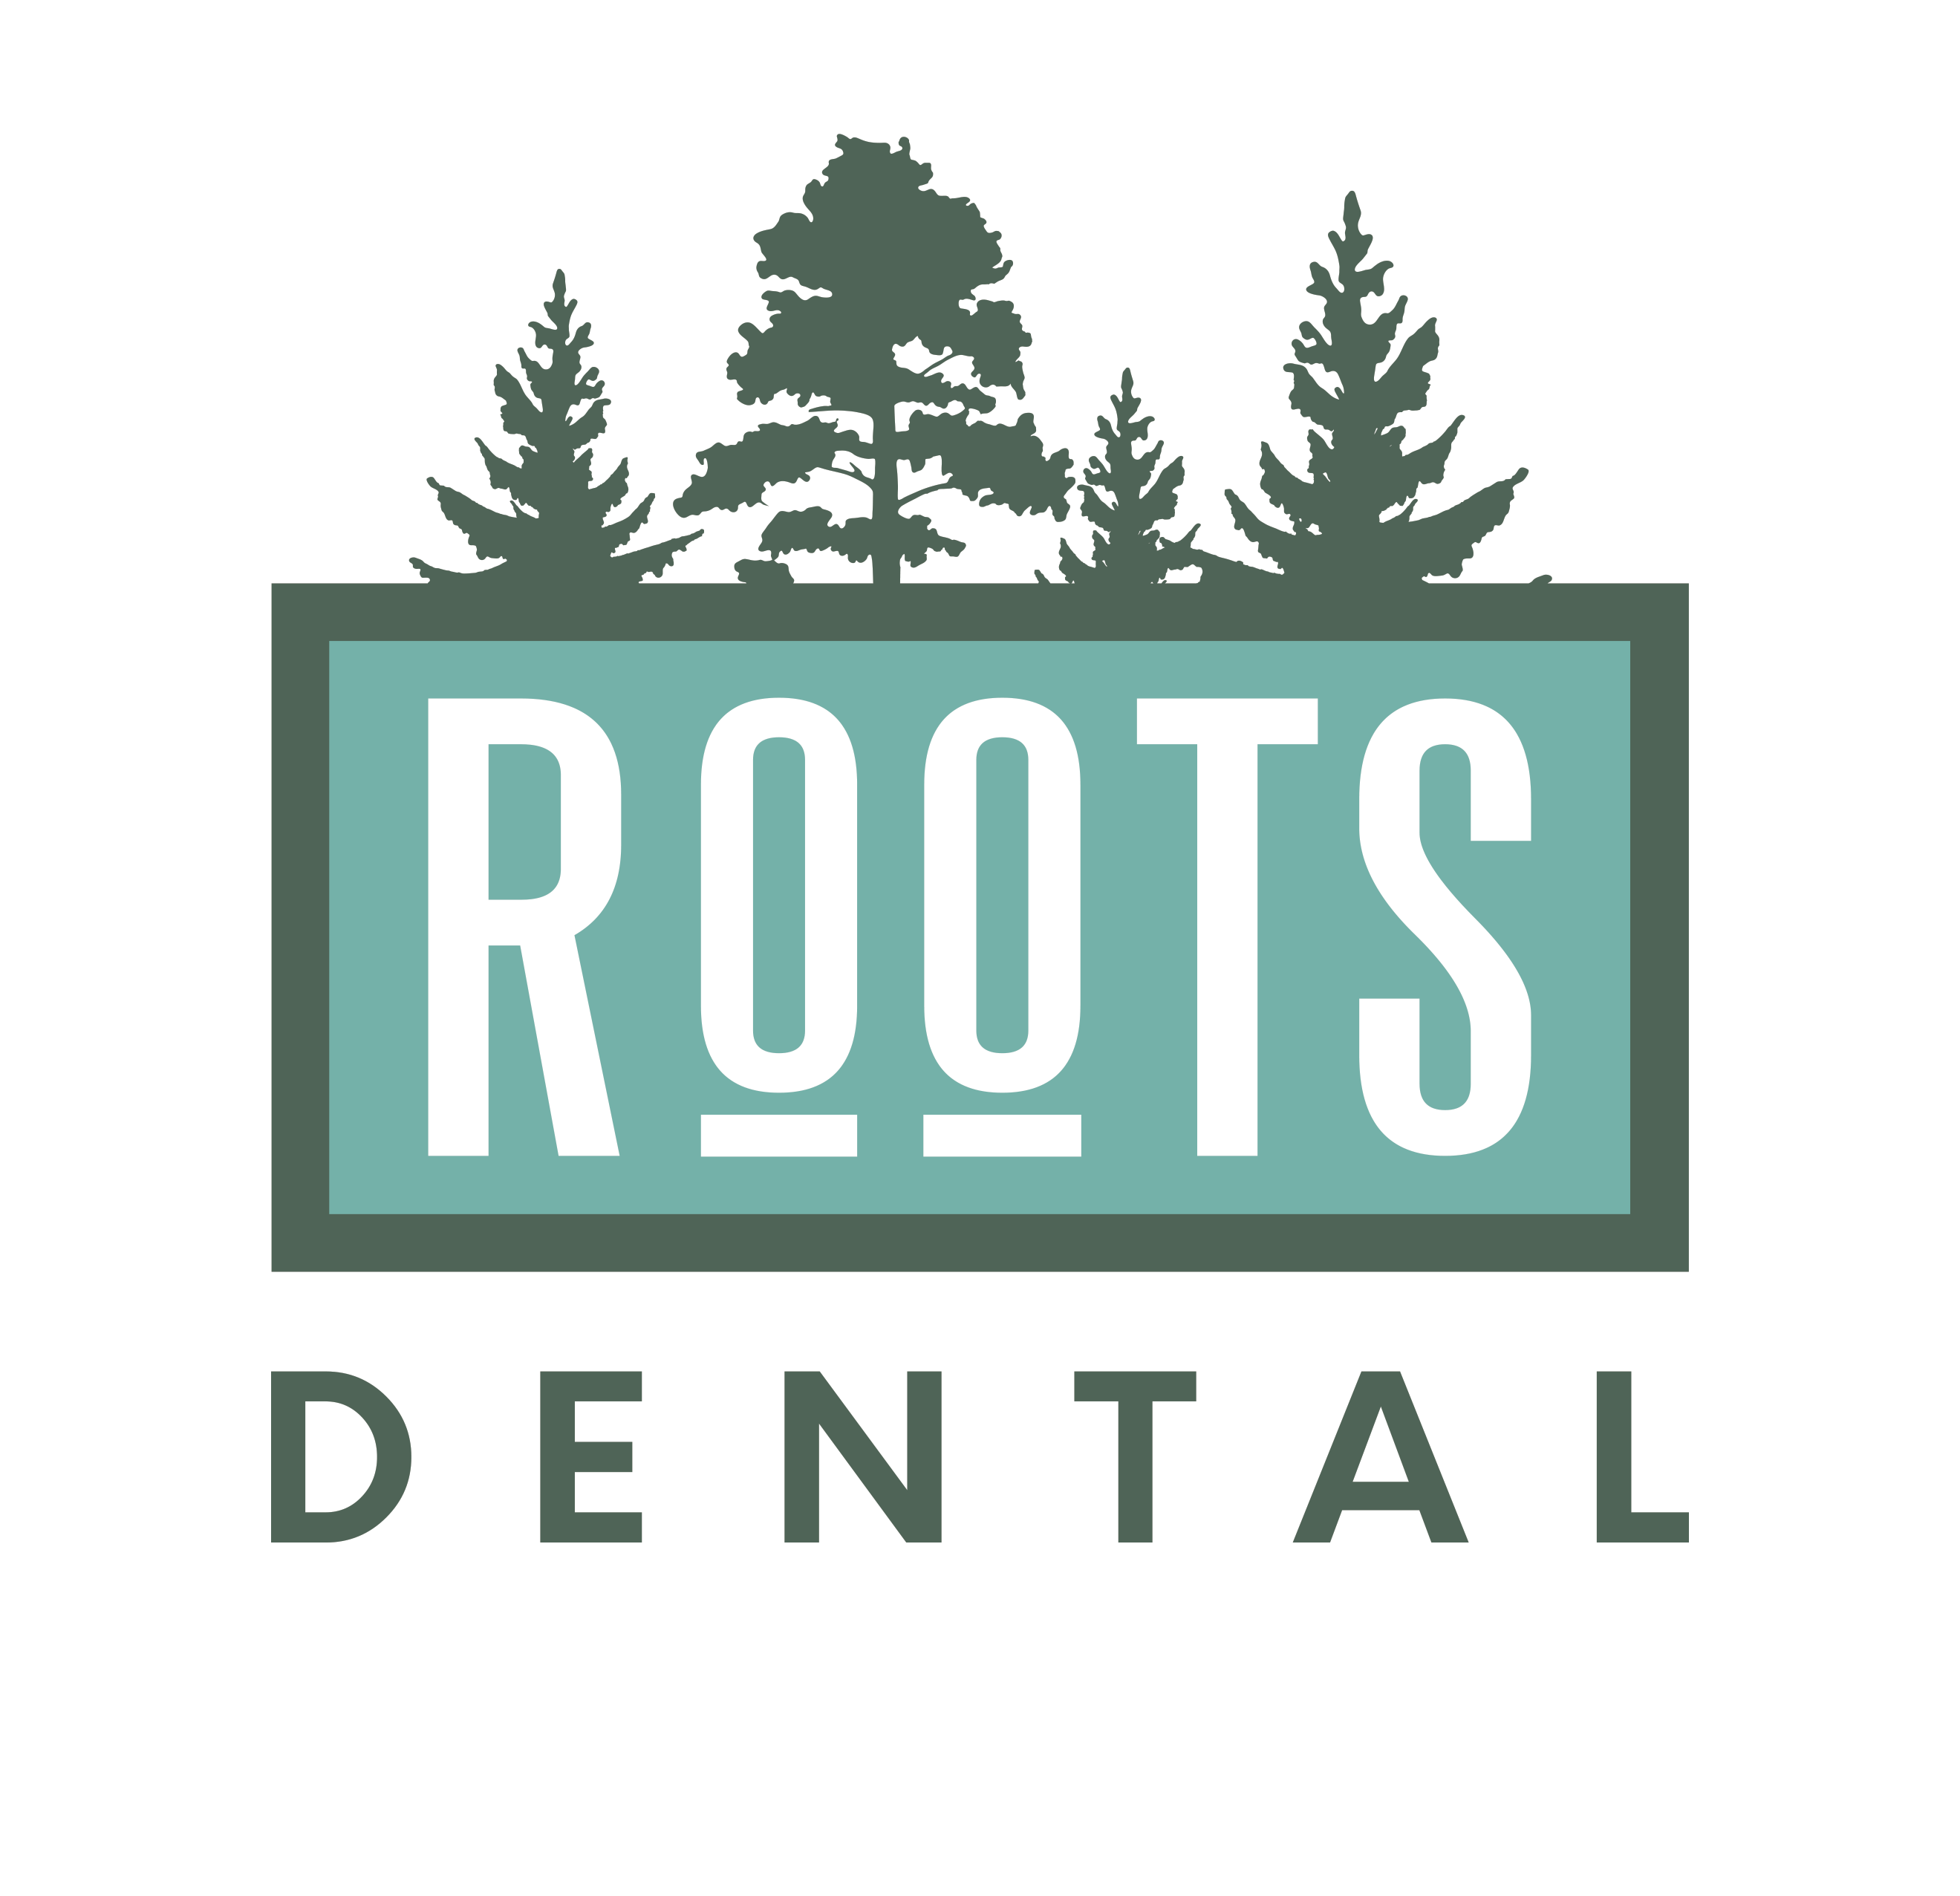 Newly opened in Southeast Portland, Roots Dental provides quality dentistry off Powell Blvd.